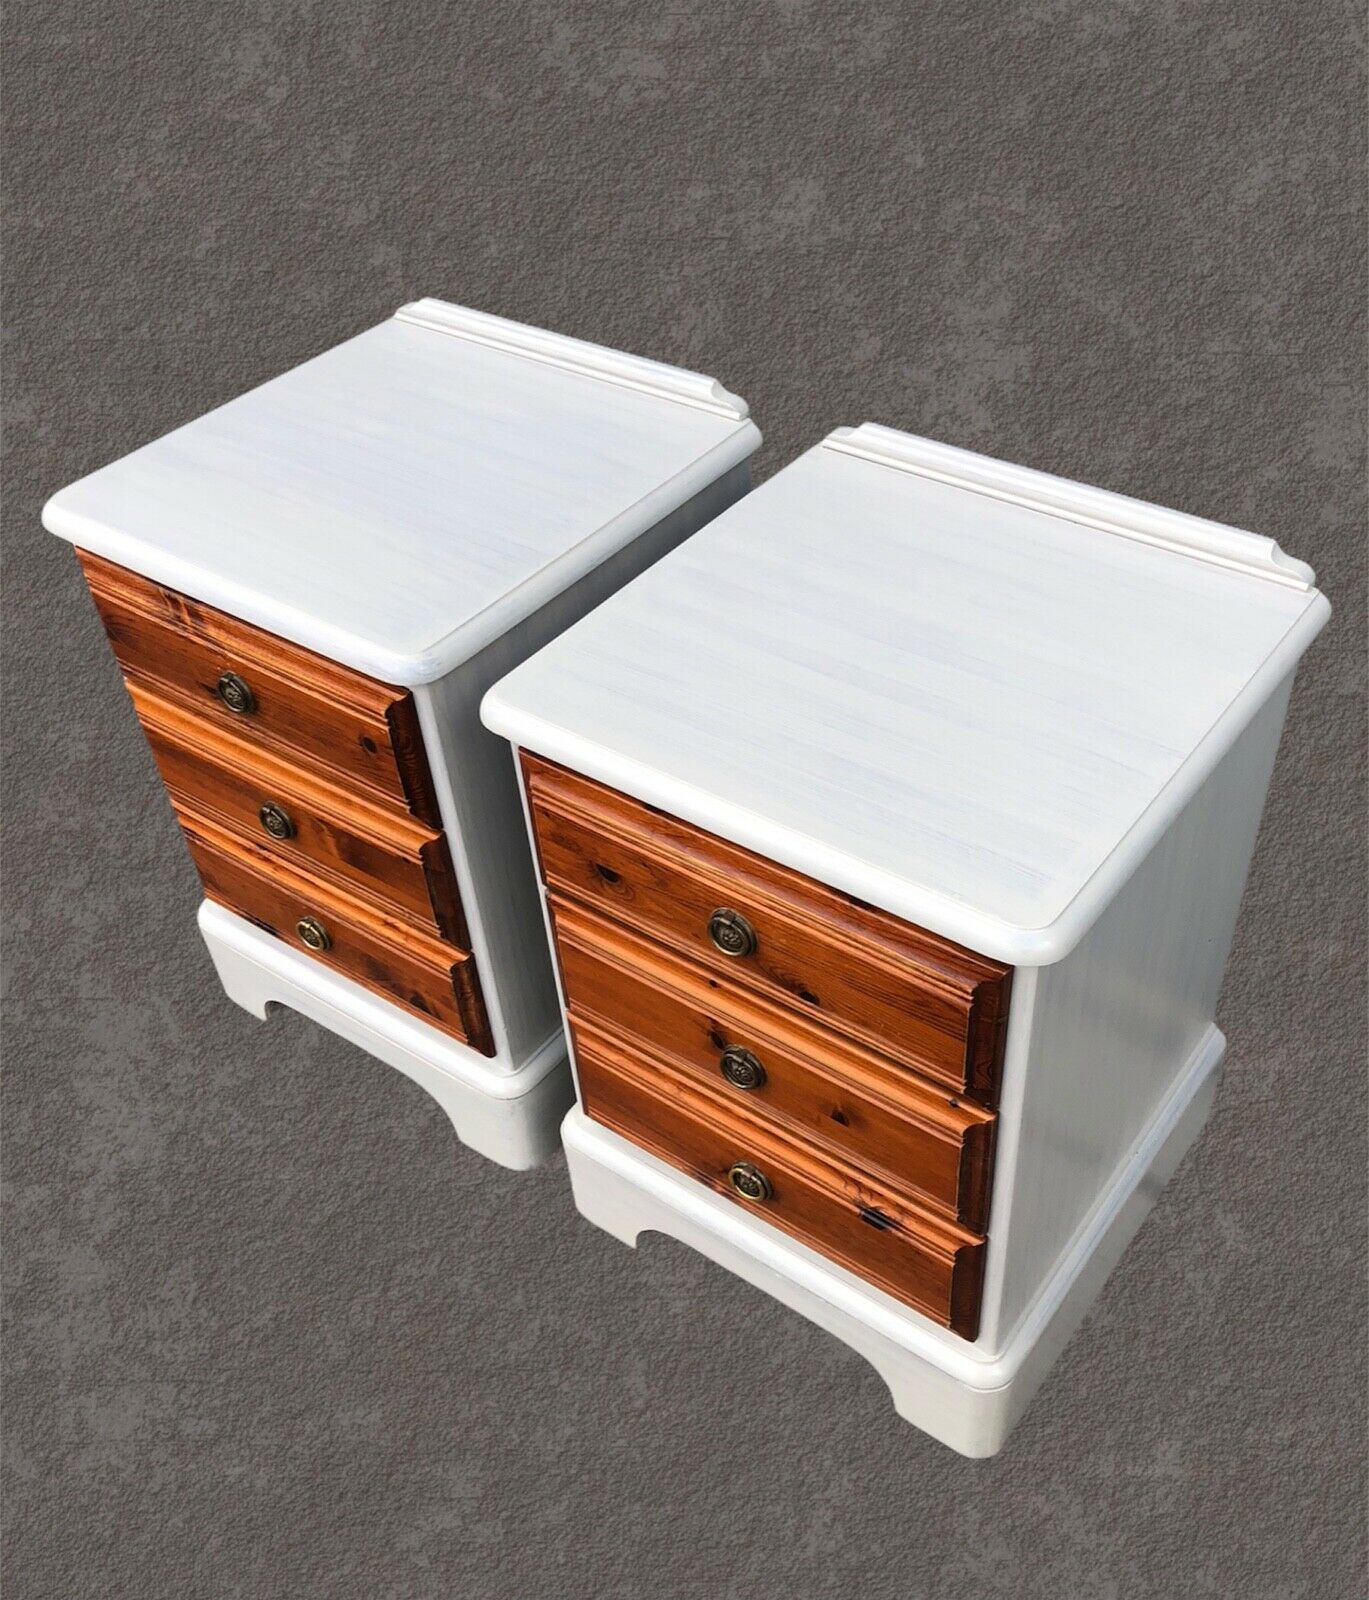 076.....Pair Of Refinished Pine Bedside Chests / Bedside Tables